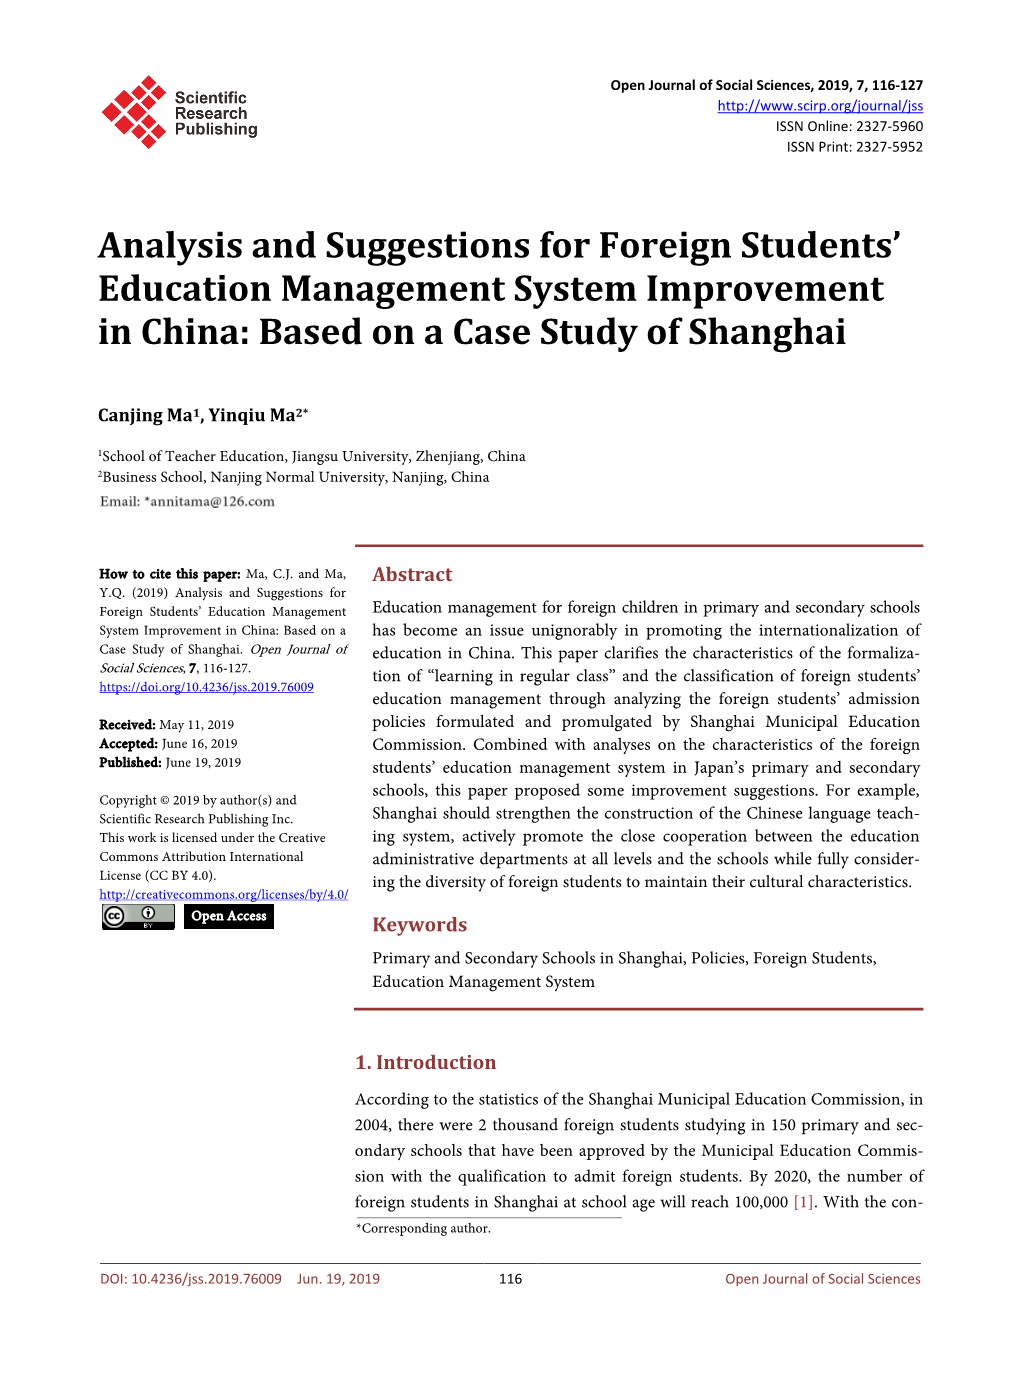 Analysis and Suggestions for Foreign Students’ Education Management System Improvement in China: Based on a Case Study of Shanghai